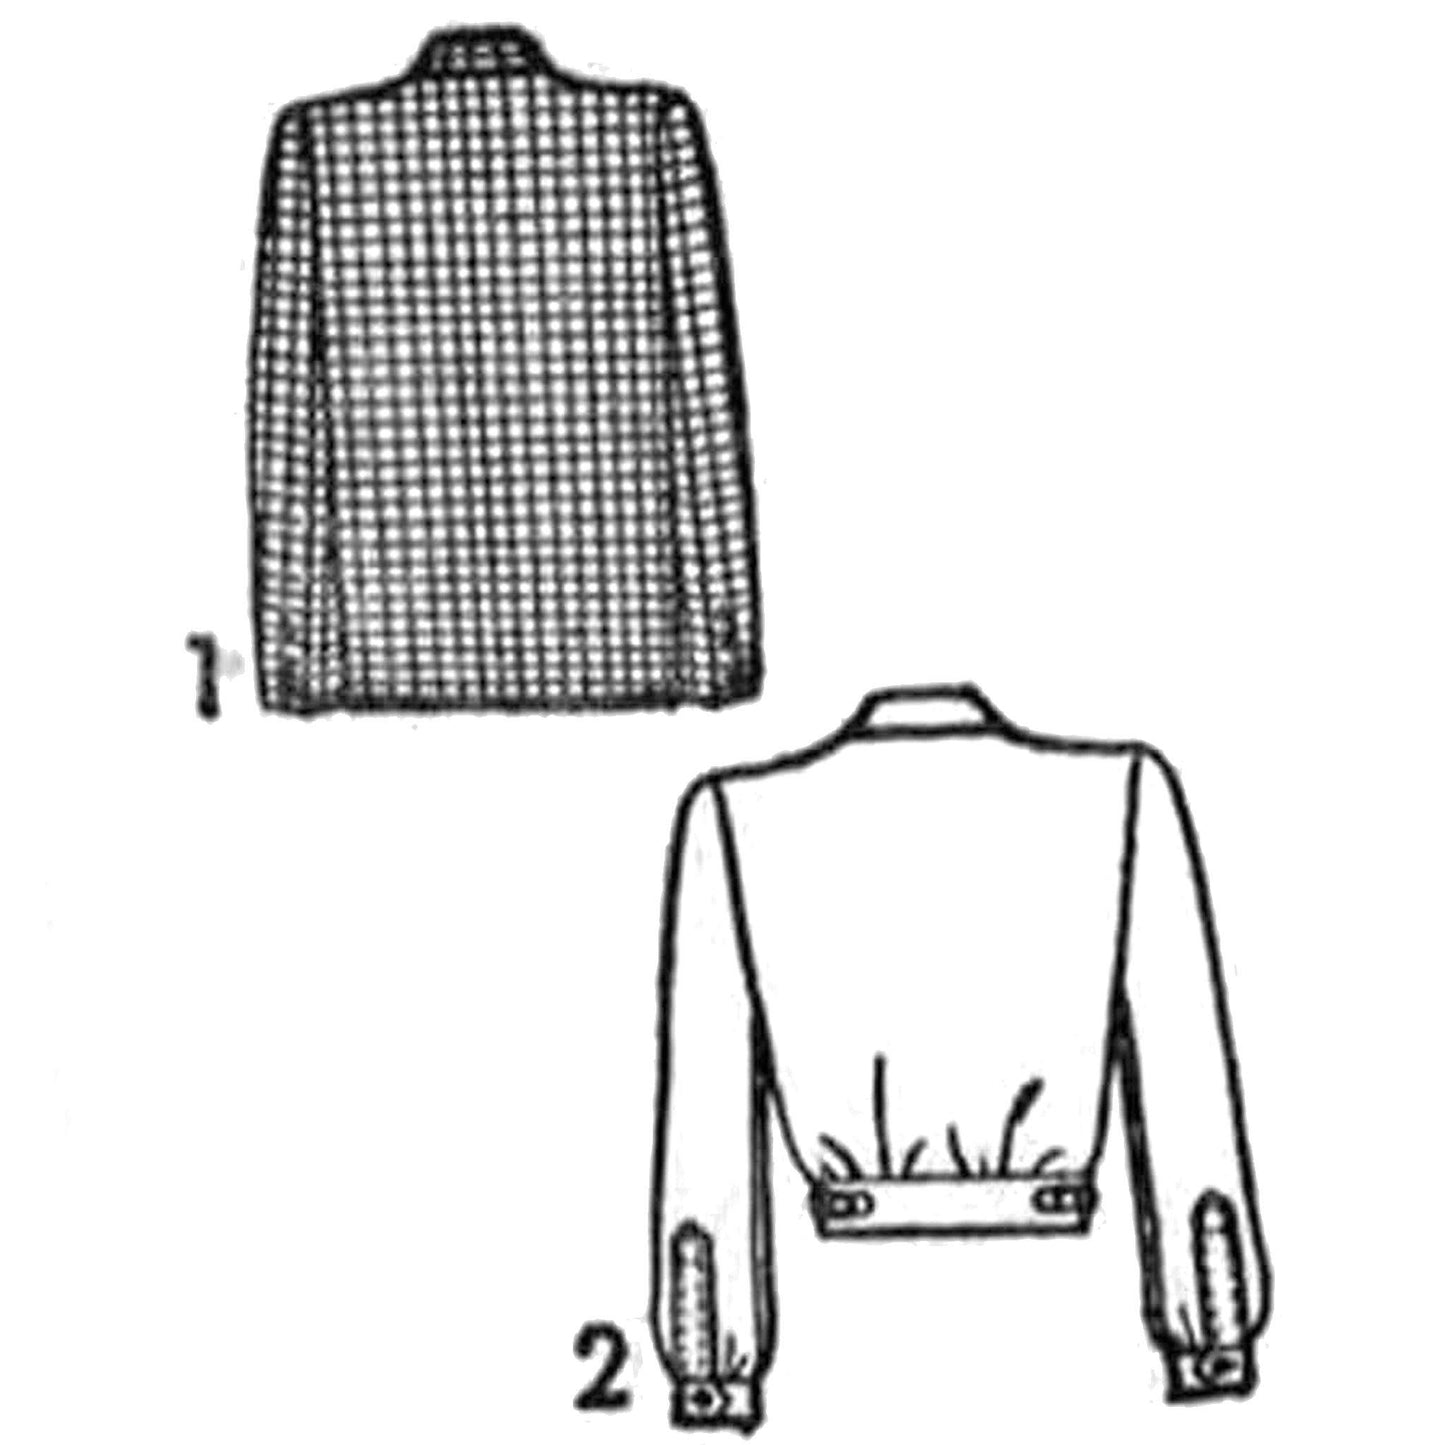 Line drawing of jackets